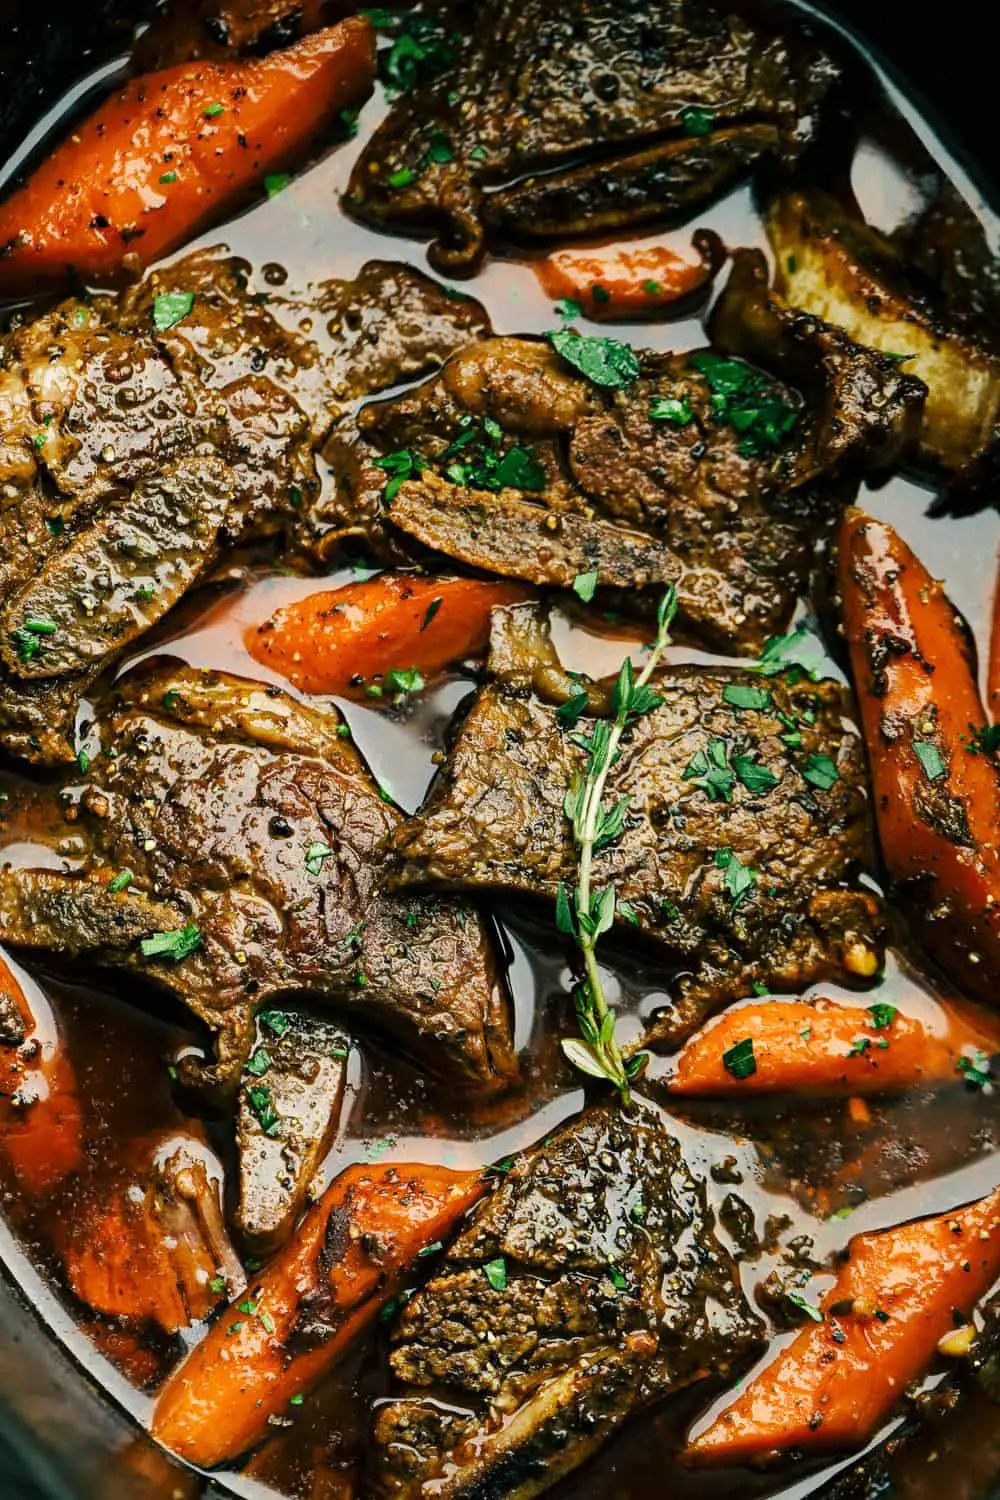 Tender, juicy flavorful Slow Cooker Short Ribs with carrots - Fall Off The Bone Slow Cooker Short Ribs